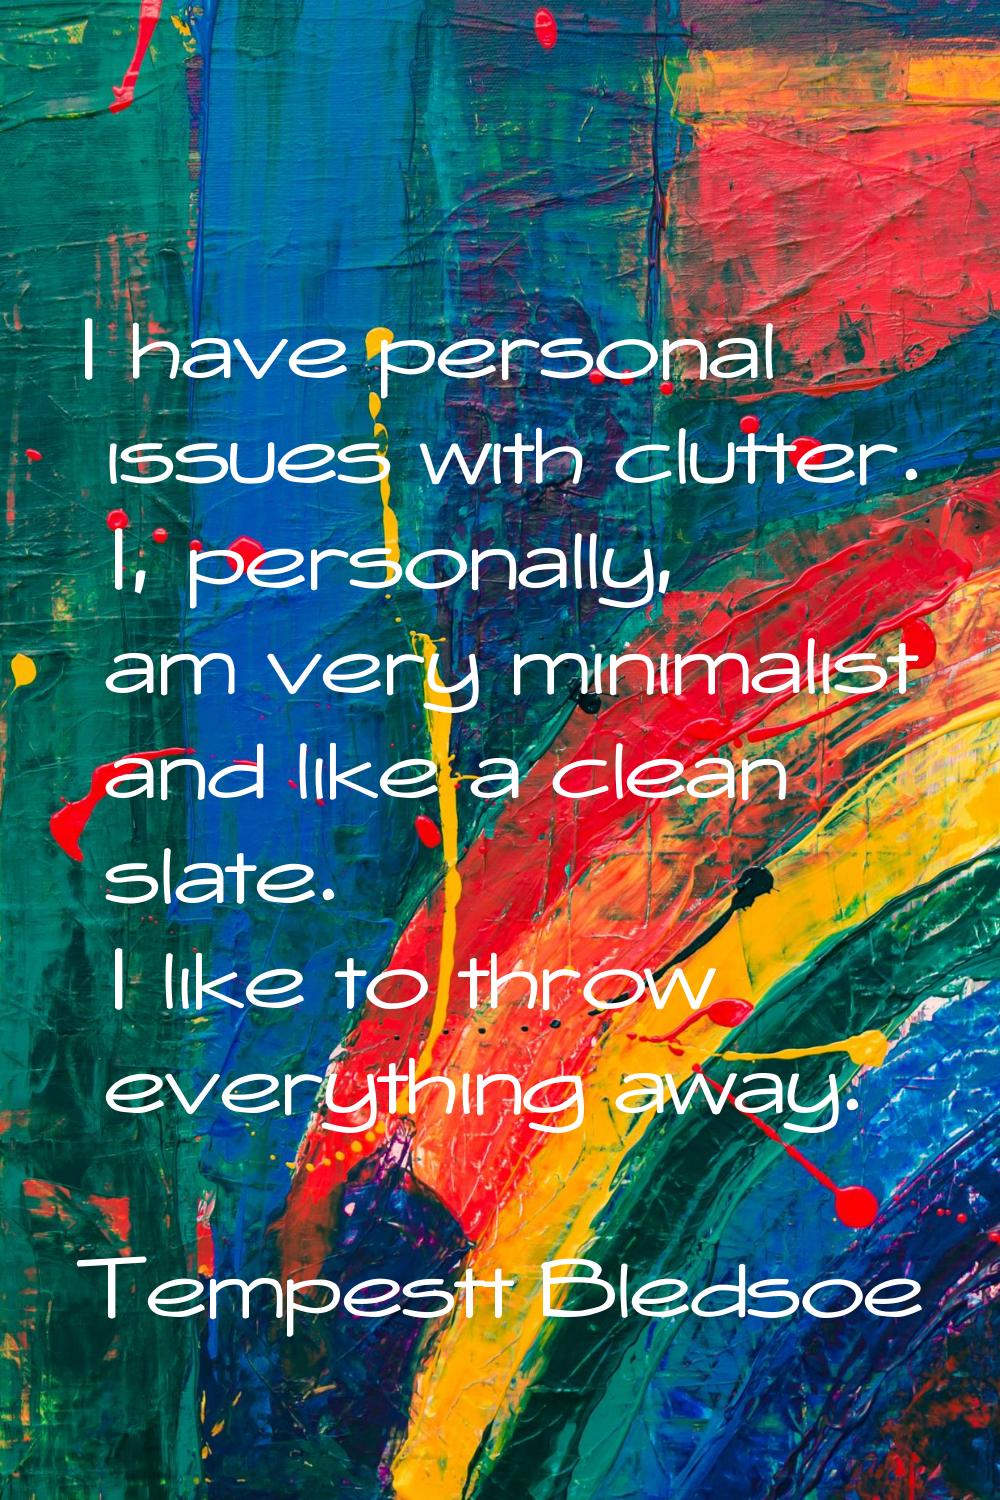 I have personal issues with clutter. I, personally, am very minimalist and like a clean slate. I li